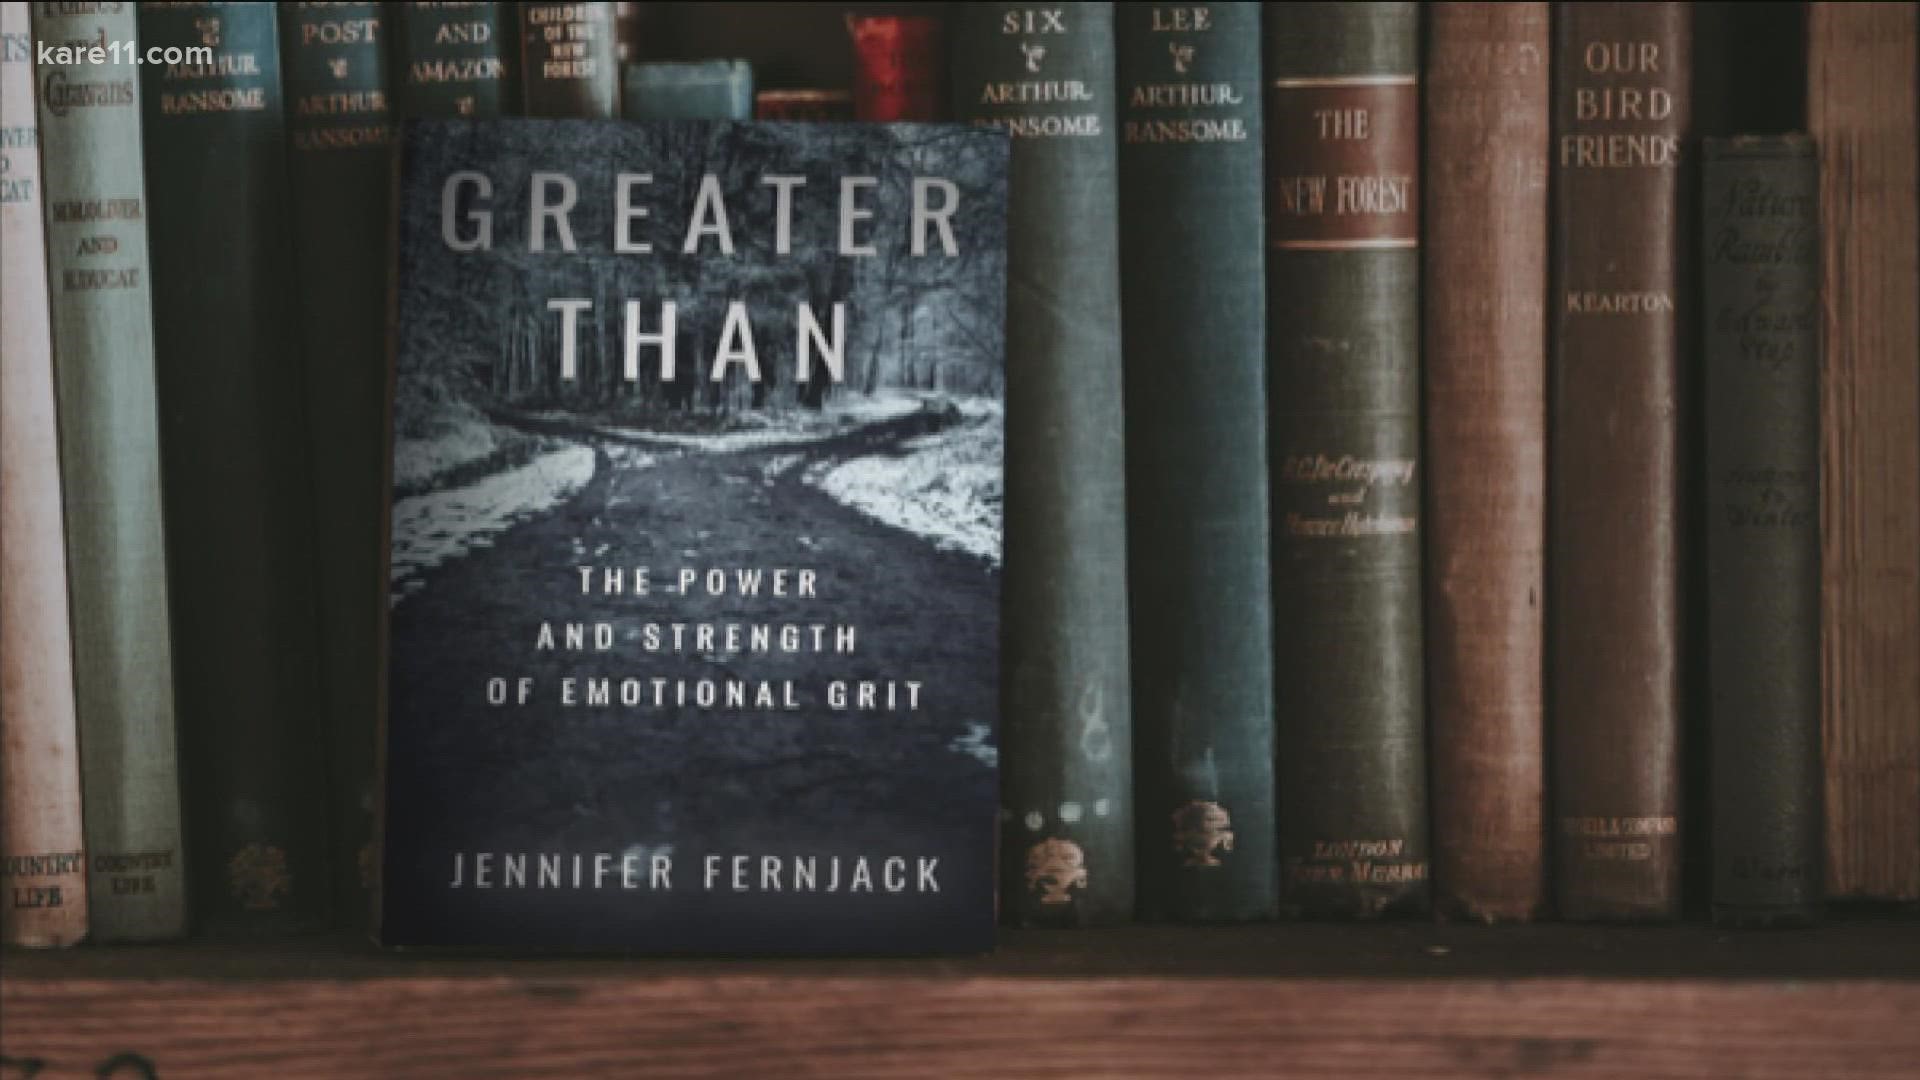 Author Jennifer Fernjack shares how a health scare inspired a book and how her self-described "hardy mindset.